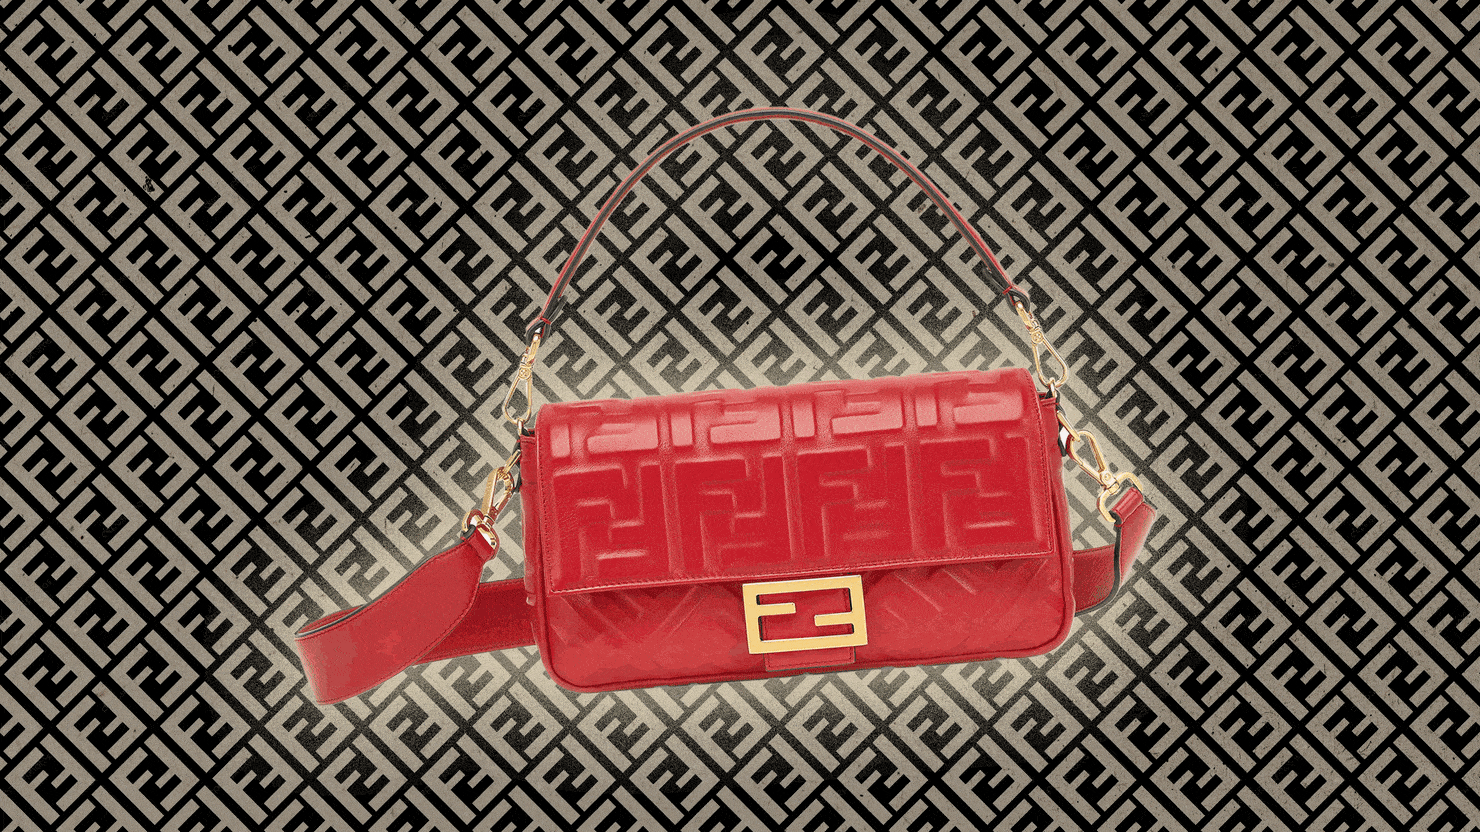 How Fendi's 'Baguette' Bag Conquered the World